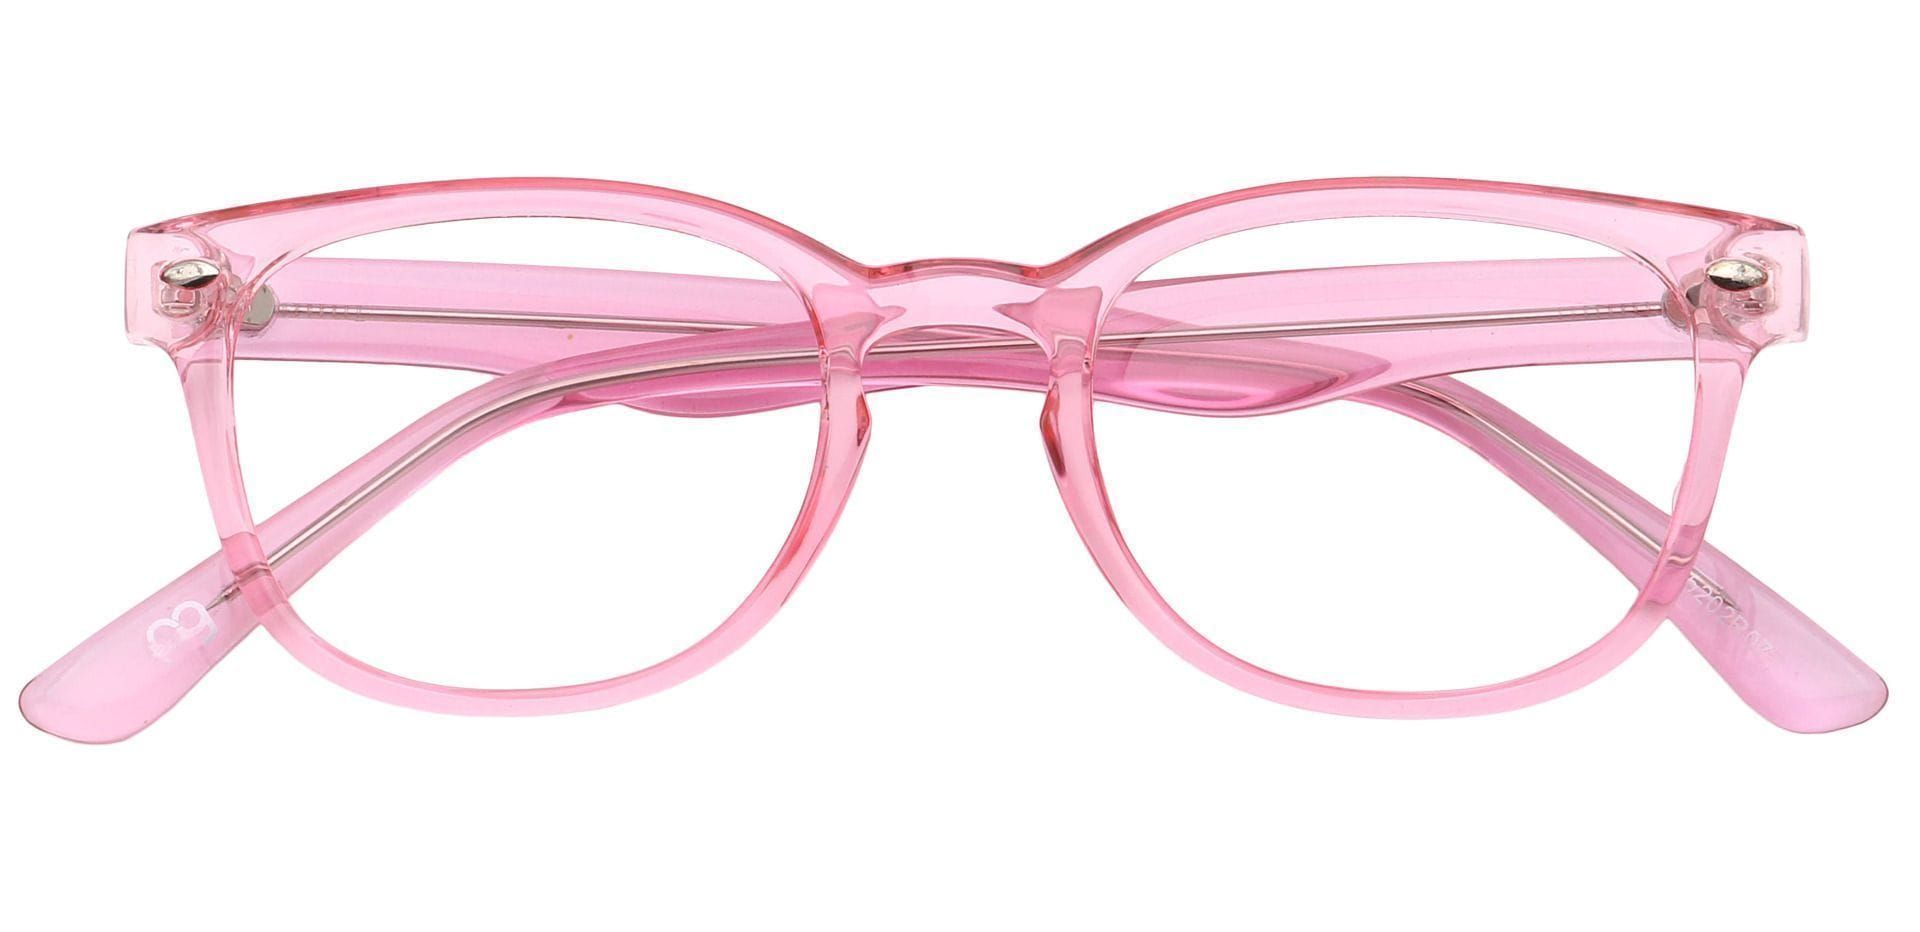 A pair of glasses with pink rounded frames.